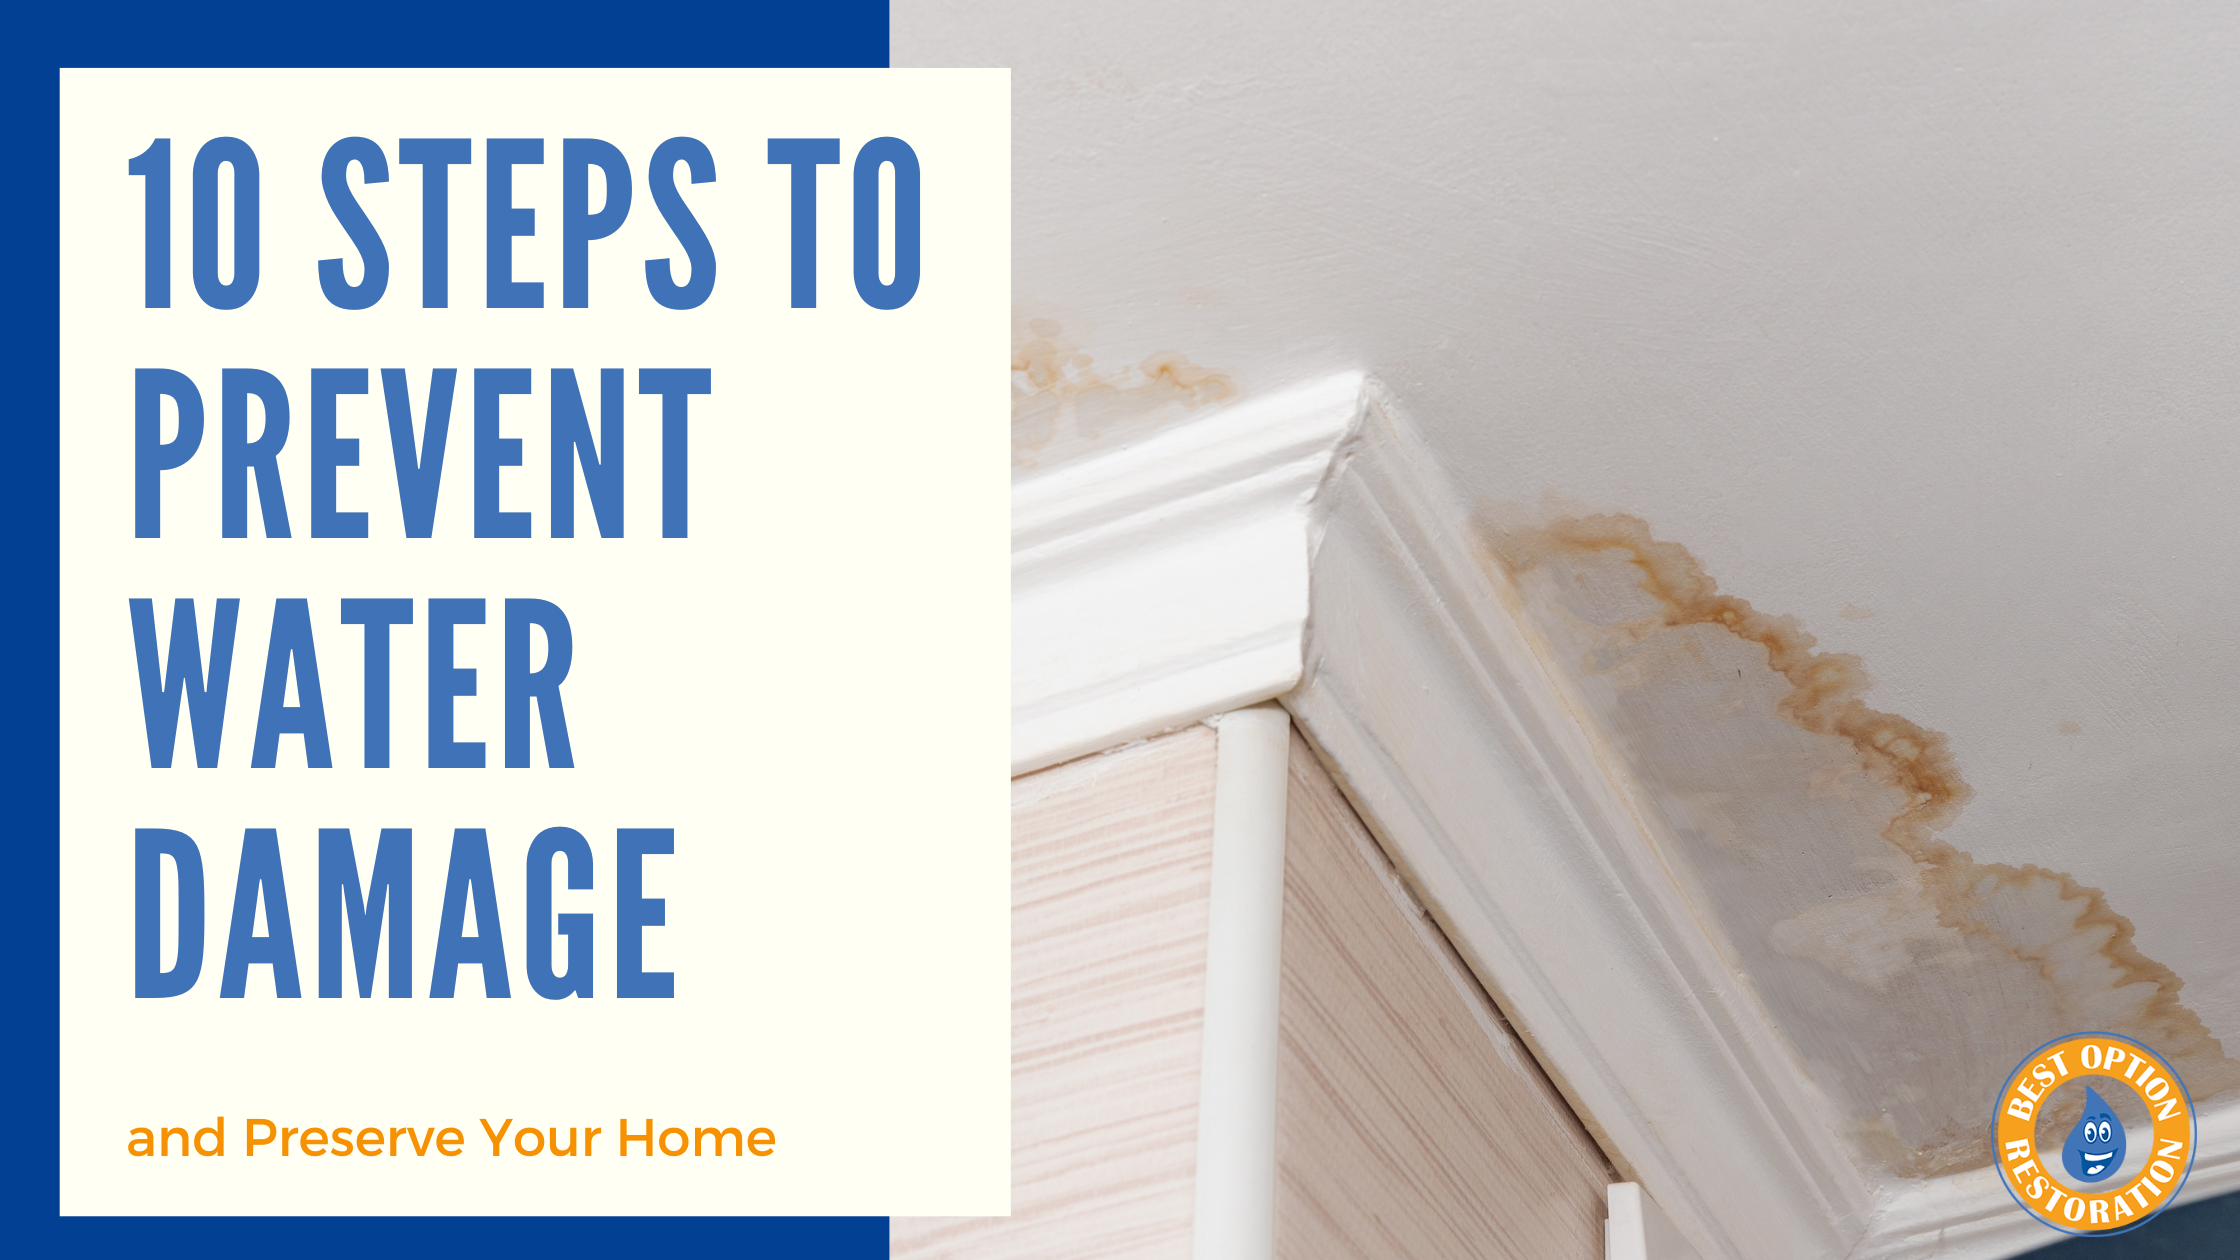 The Ultimate Guide: How to Prevent Water Damage and Preserve Your Home in 10 Easy Steps